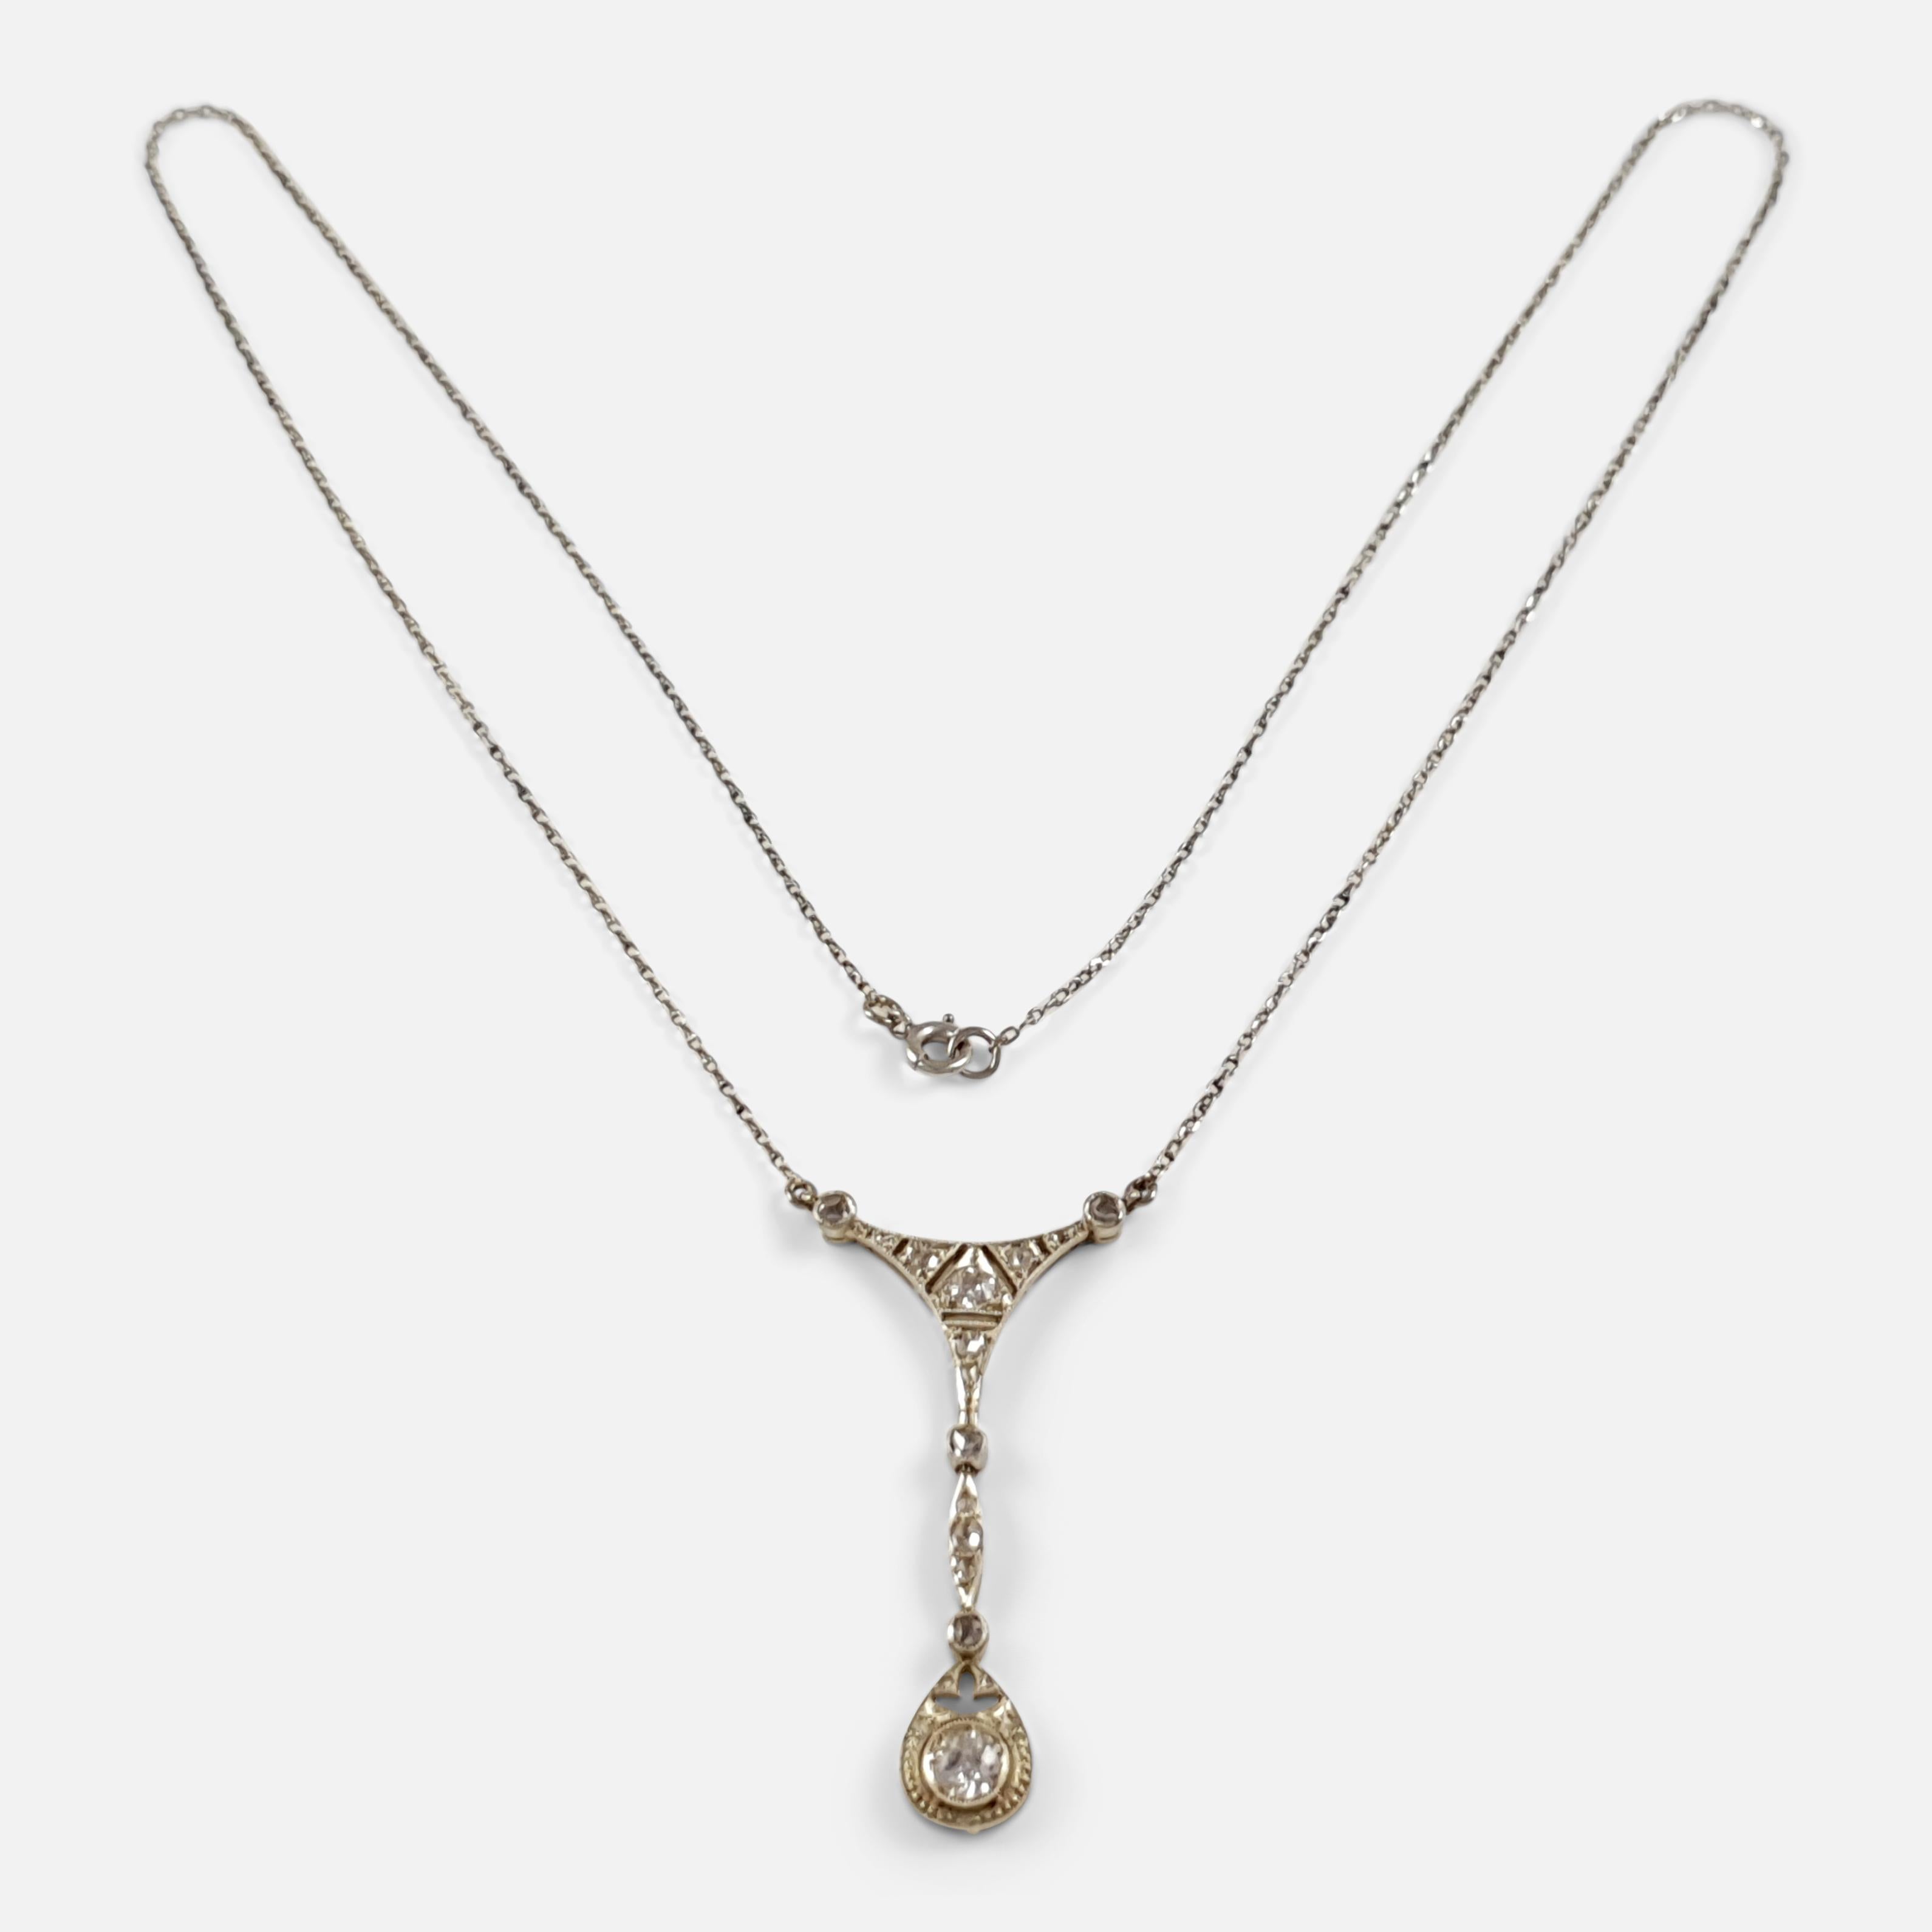 Description: - This is a fine antique Belle Epoque period white gold 0.575cts diamond pendant necklace, circa 1905. The articulated gold pendant is set with graduated circular-cut and rose-cut diamonds, on a fine link gold neck chain, and later roll